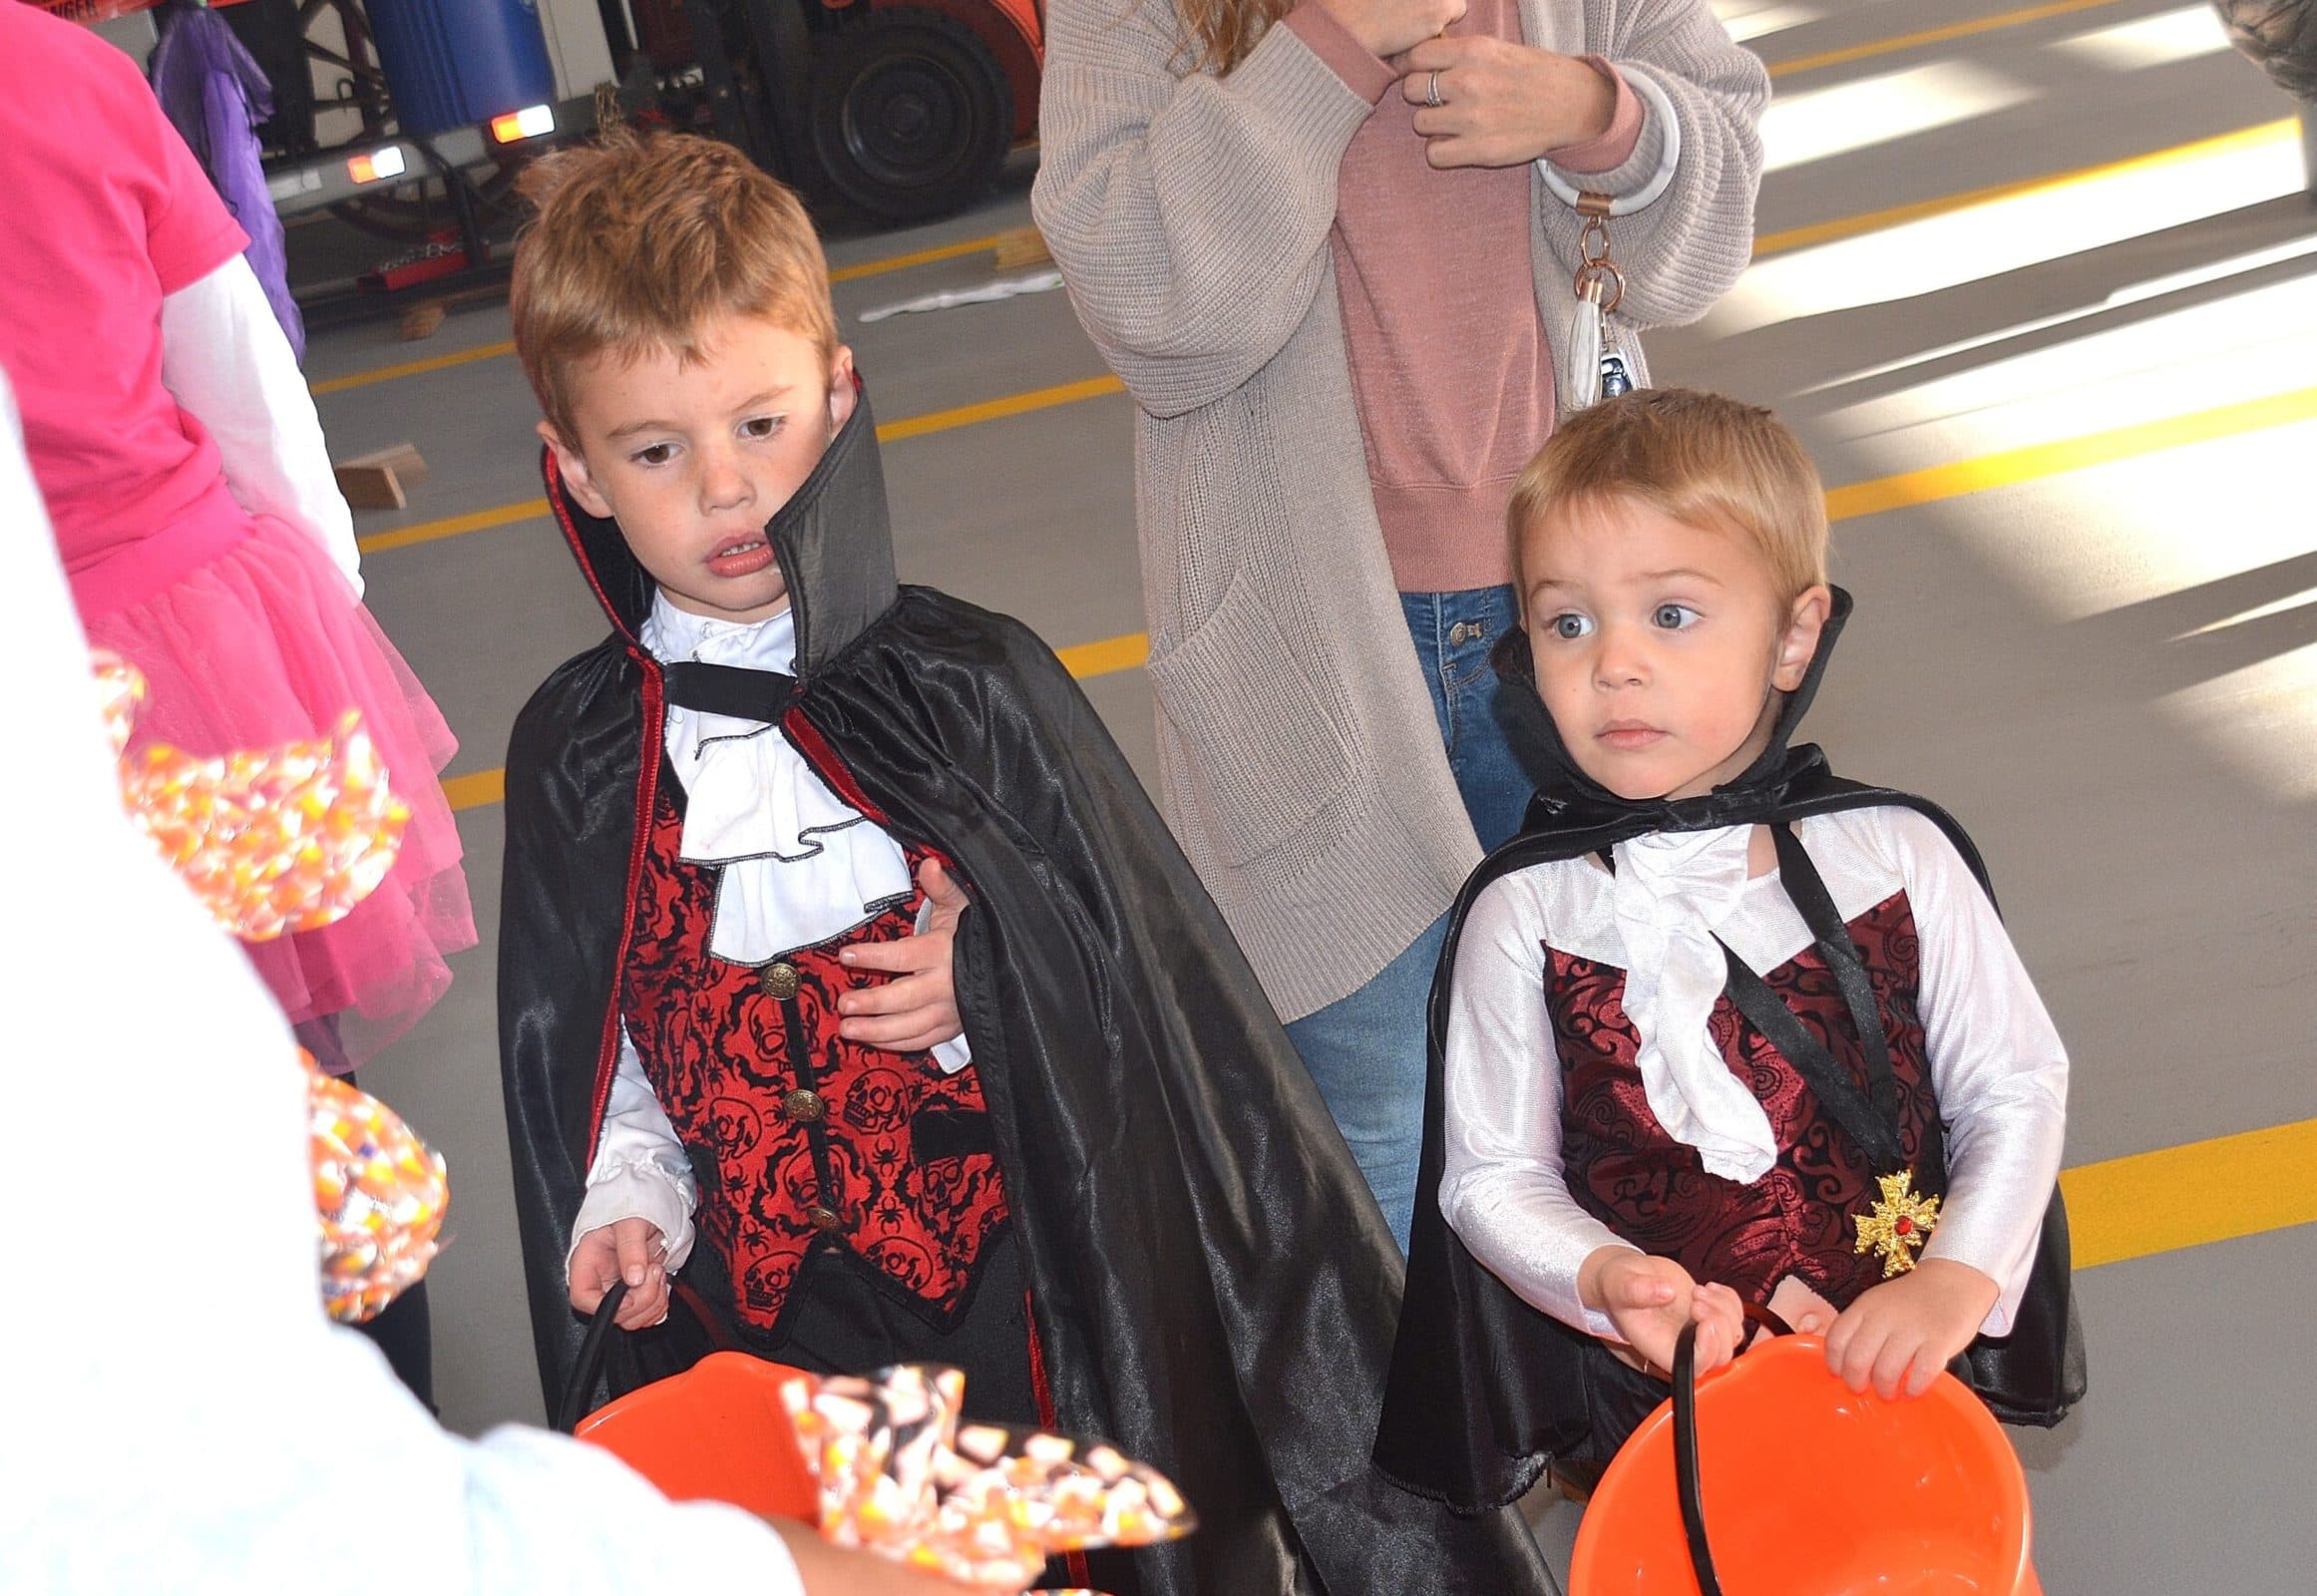 Costumed as the Dracula brothers, the Shiver brothers – Jackson, 5, and Beckett, 3 – get treats while marching past judges and go on to win scariest costume in their age category.